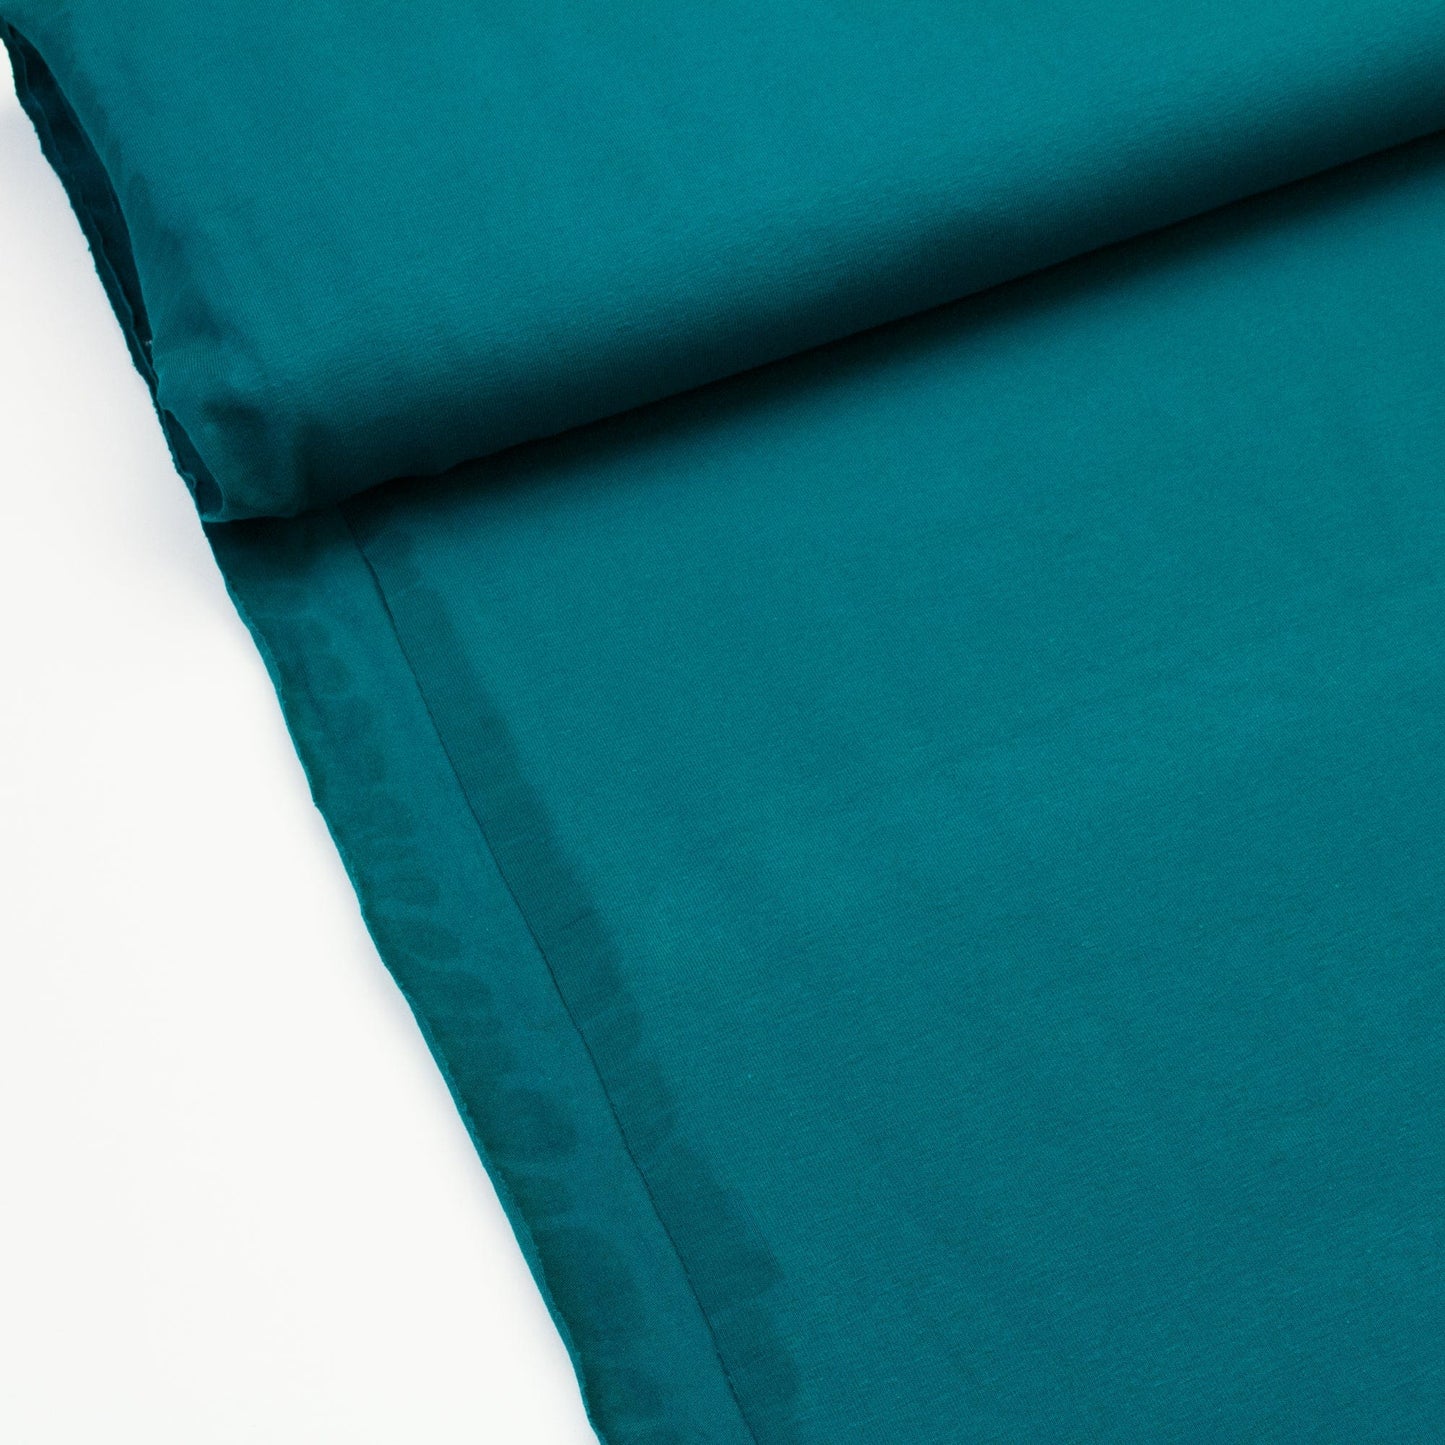 Cotton Jersey in Teal Green